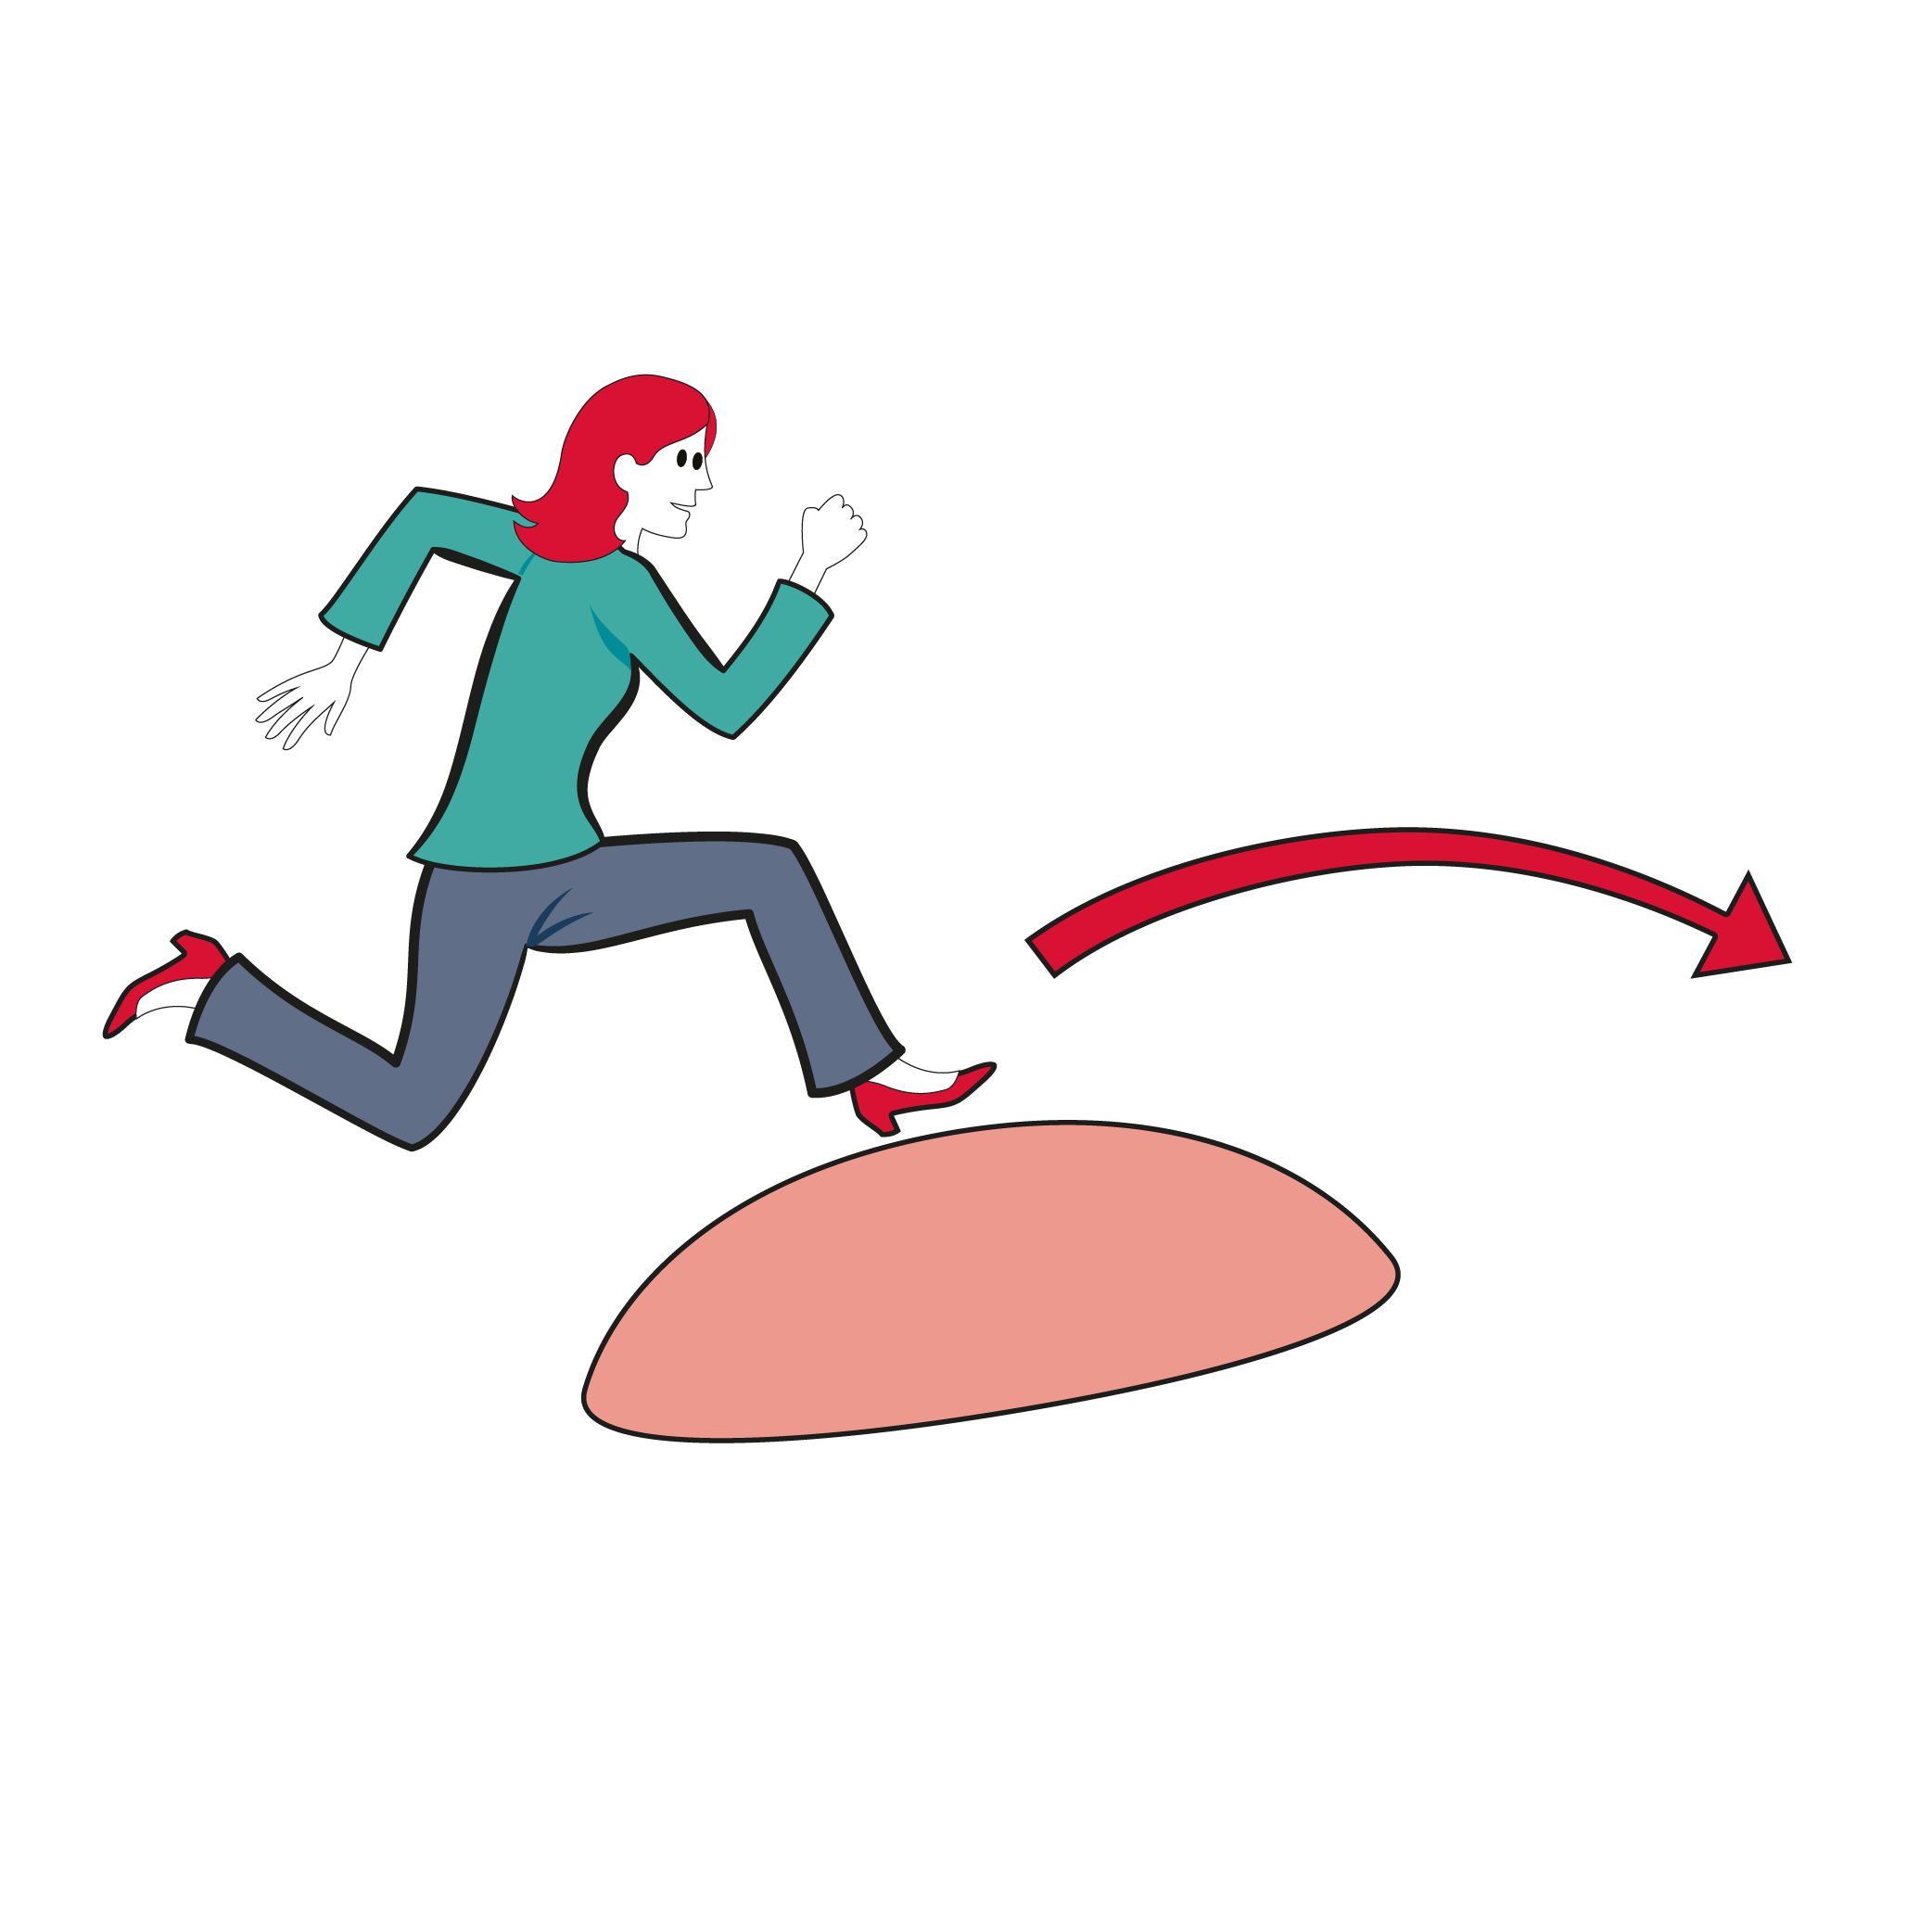 a cartoon illustration showing a woman rising above the line in an infographic